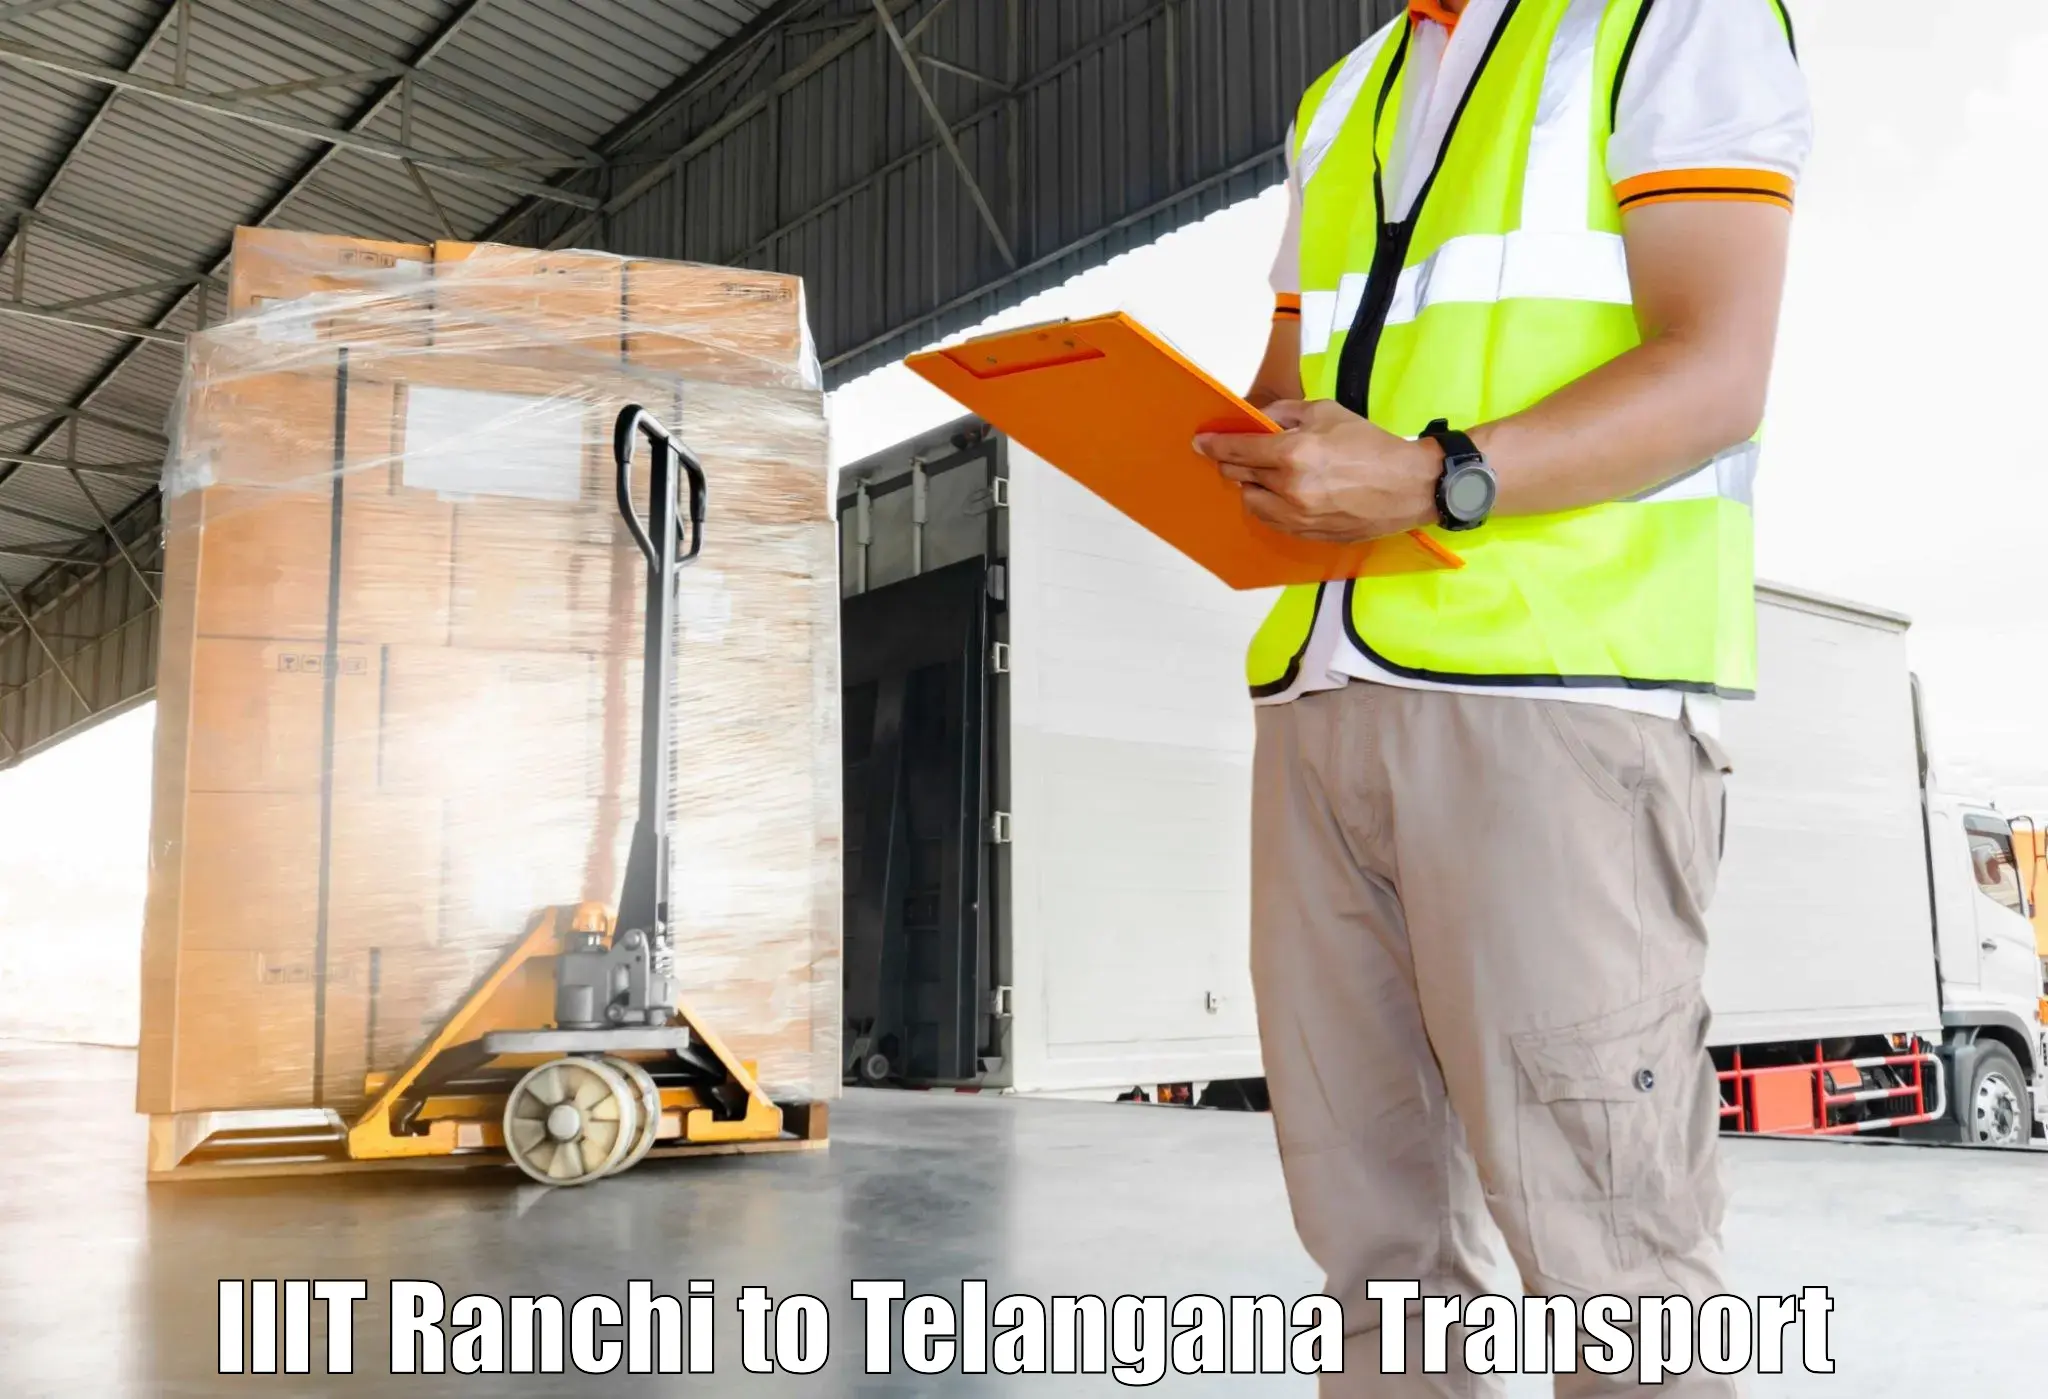 Cargo transportation services in IIIT Ranchi to Madhira